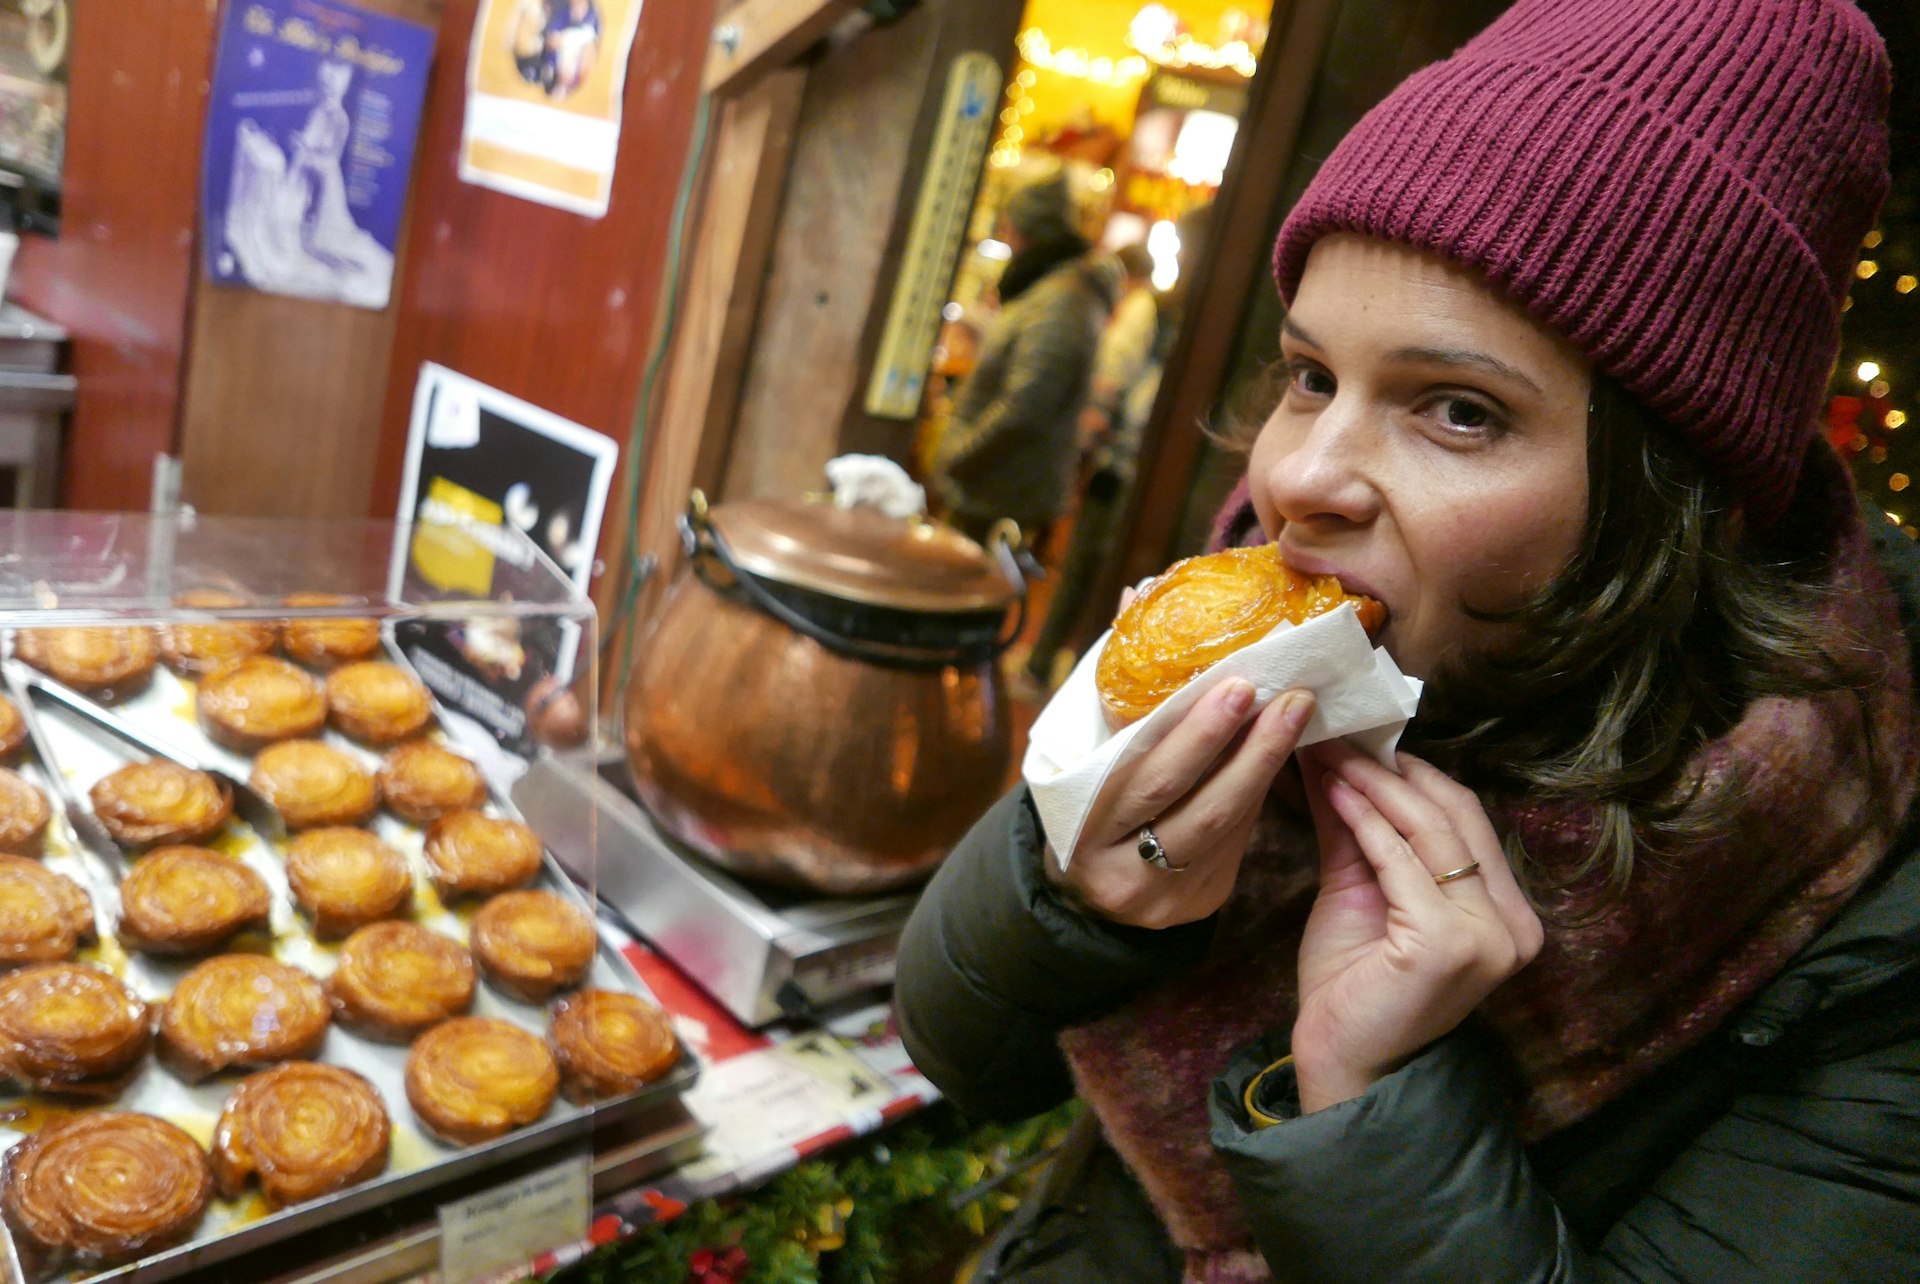  woman eats a kouign amann, a dessert typical of Brittany, in Rochefort-en-Terre, Brittany, France